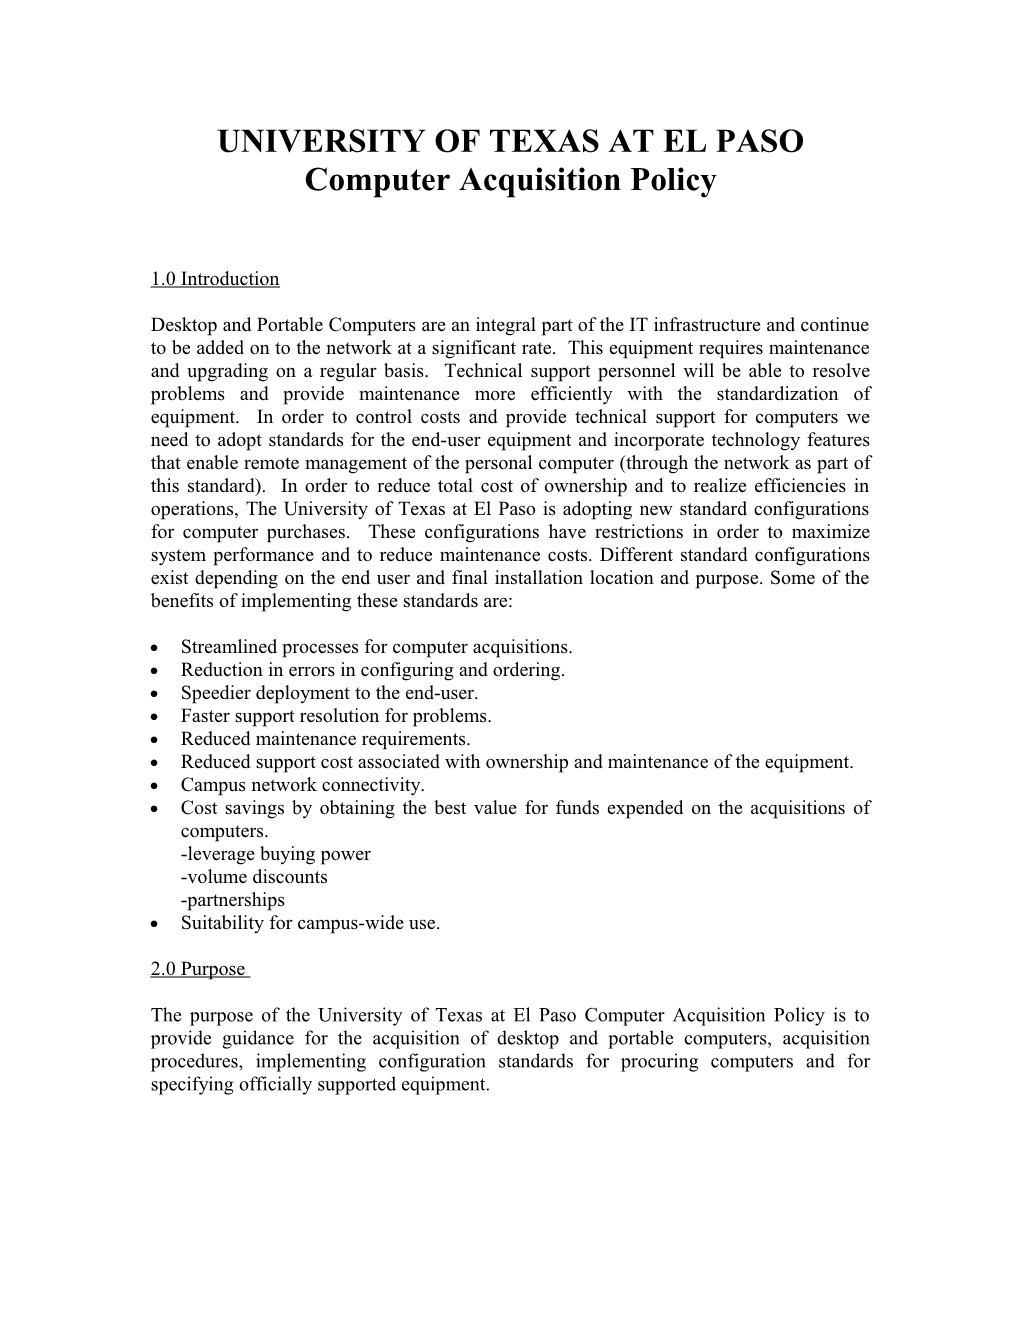 Computer Acquisition Policy